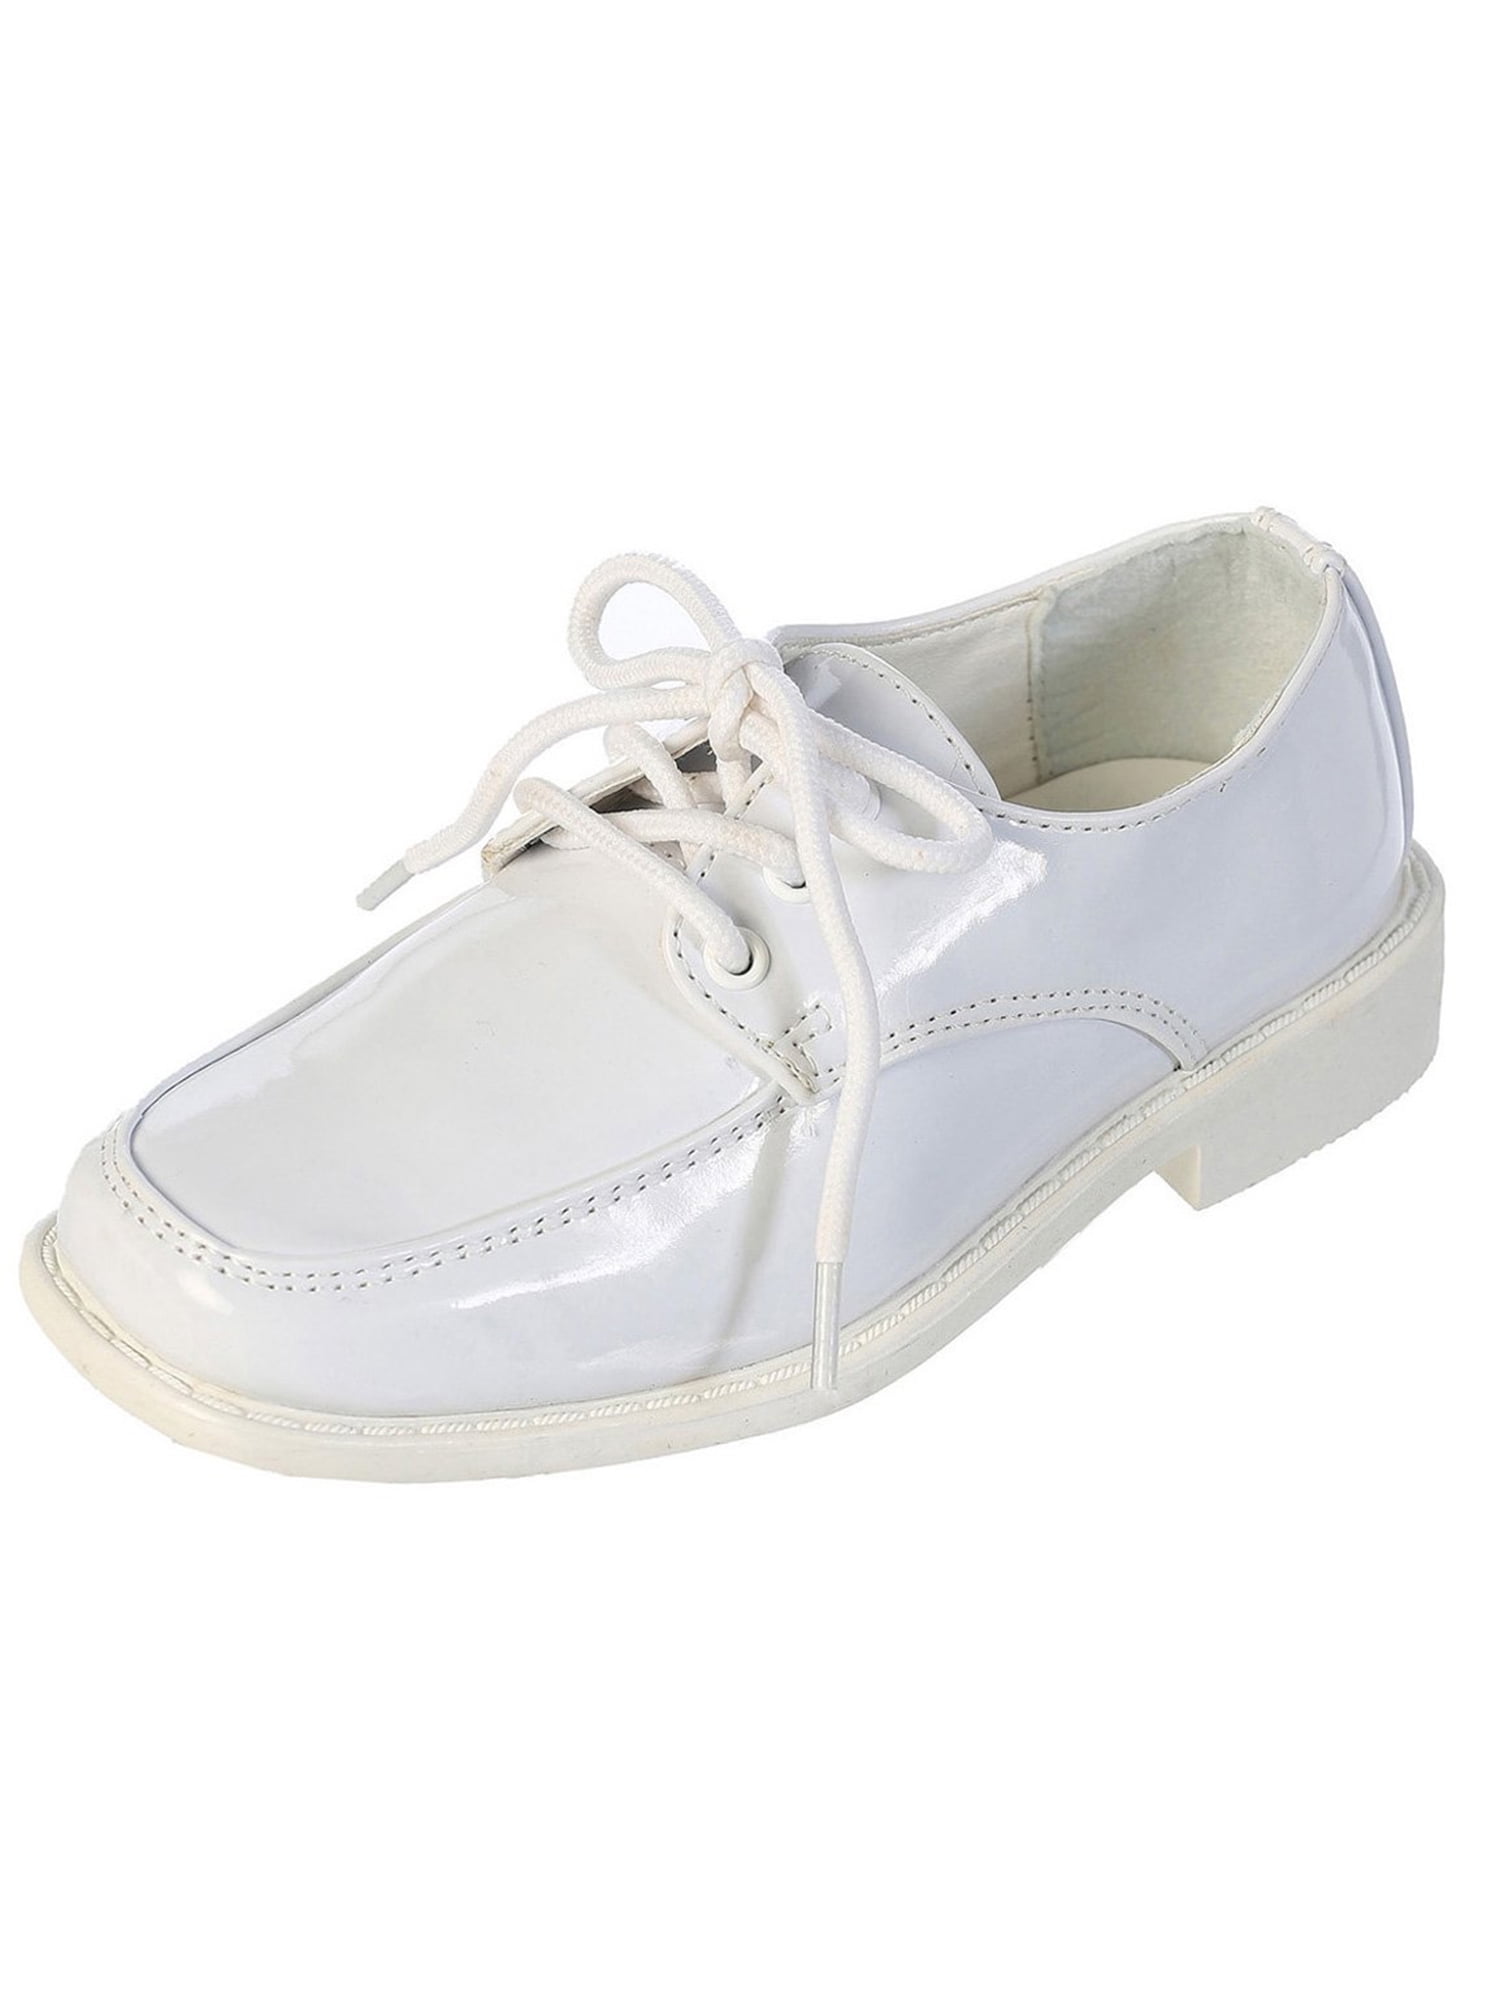 Avery Hill Boys Shiny or Matte Patent Leather Special Occasion Christening Shoes 